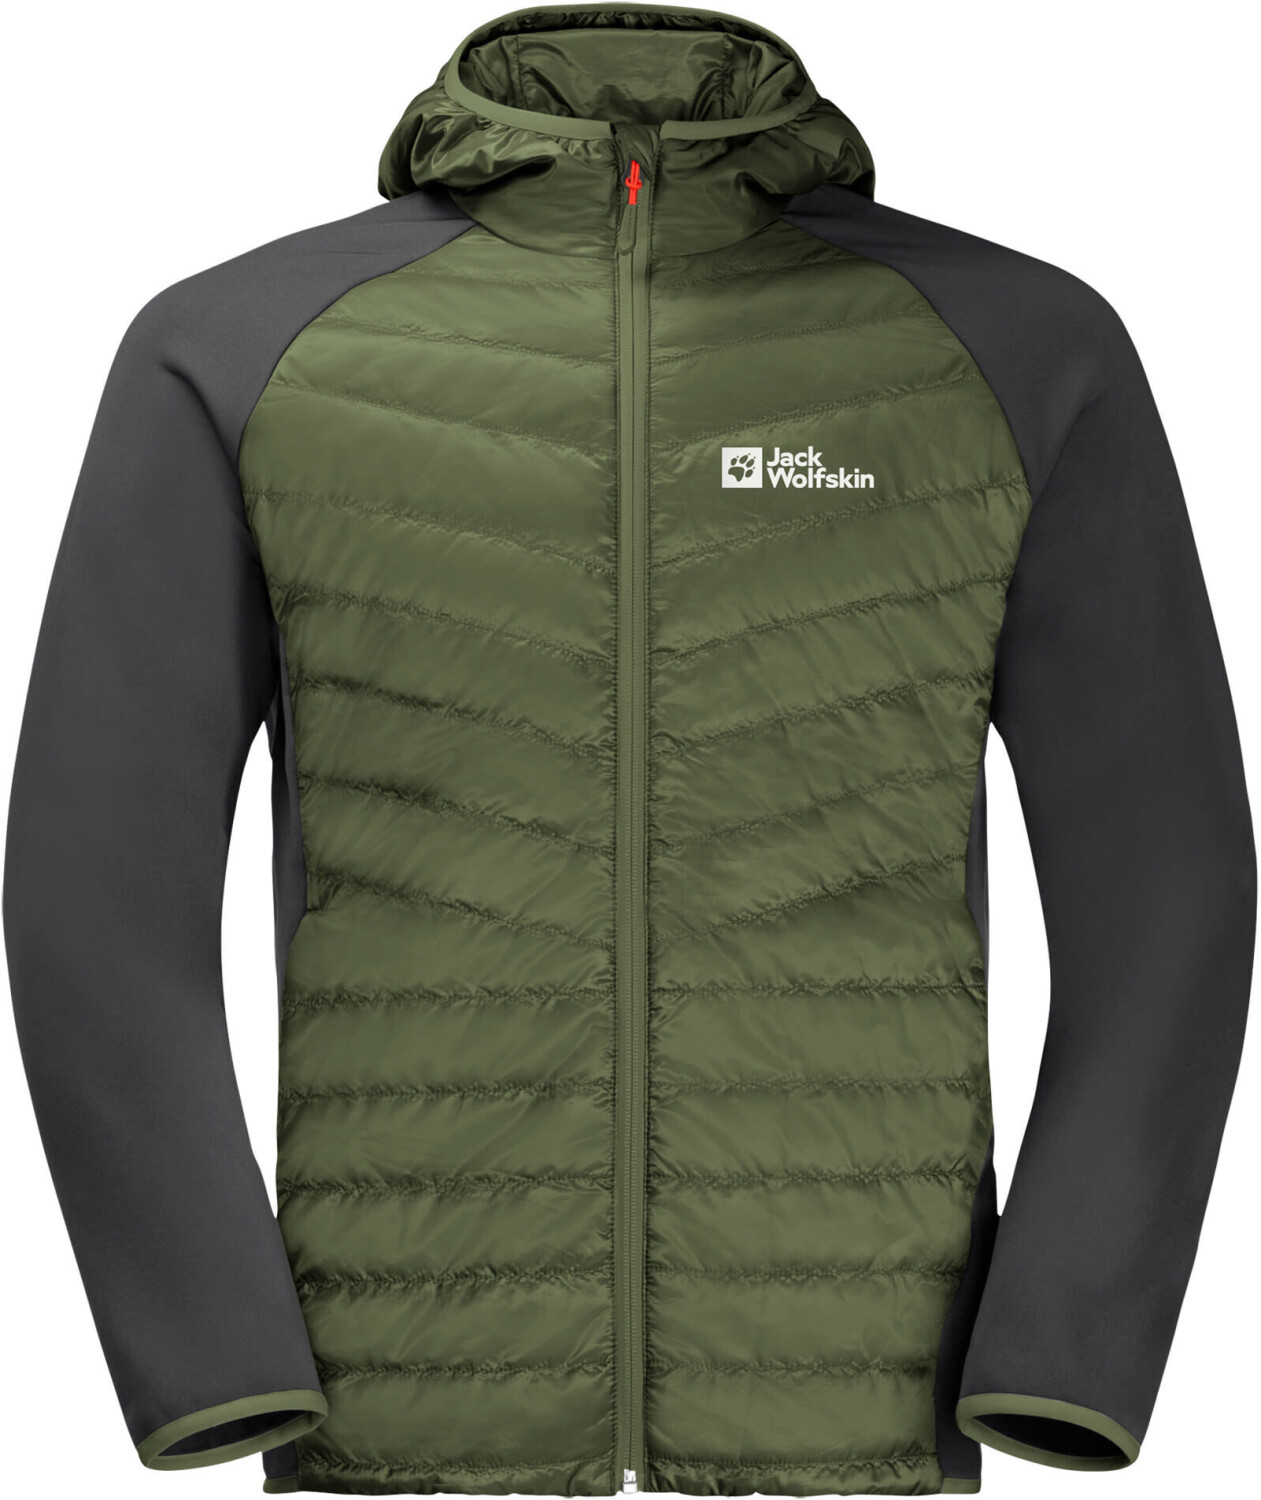 Buy Jack Wolfskin Routeburn Pro Hybrid M from £60.00 (Today) – Best Deals  on